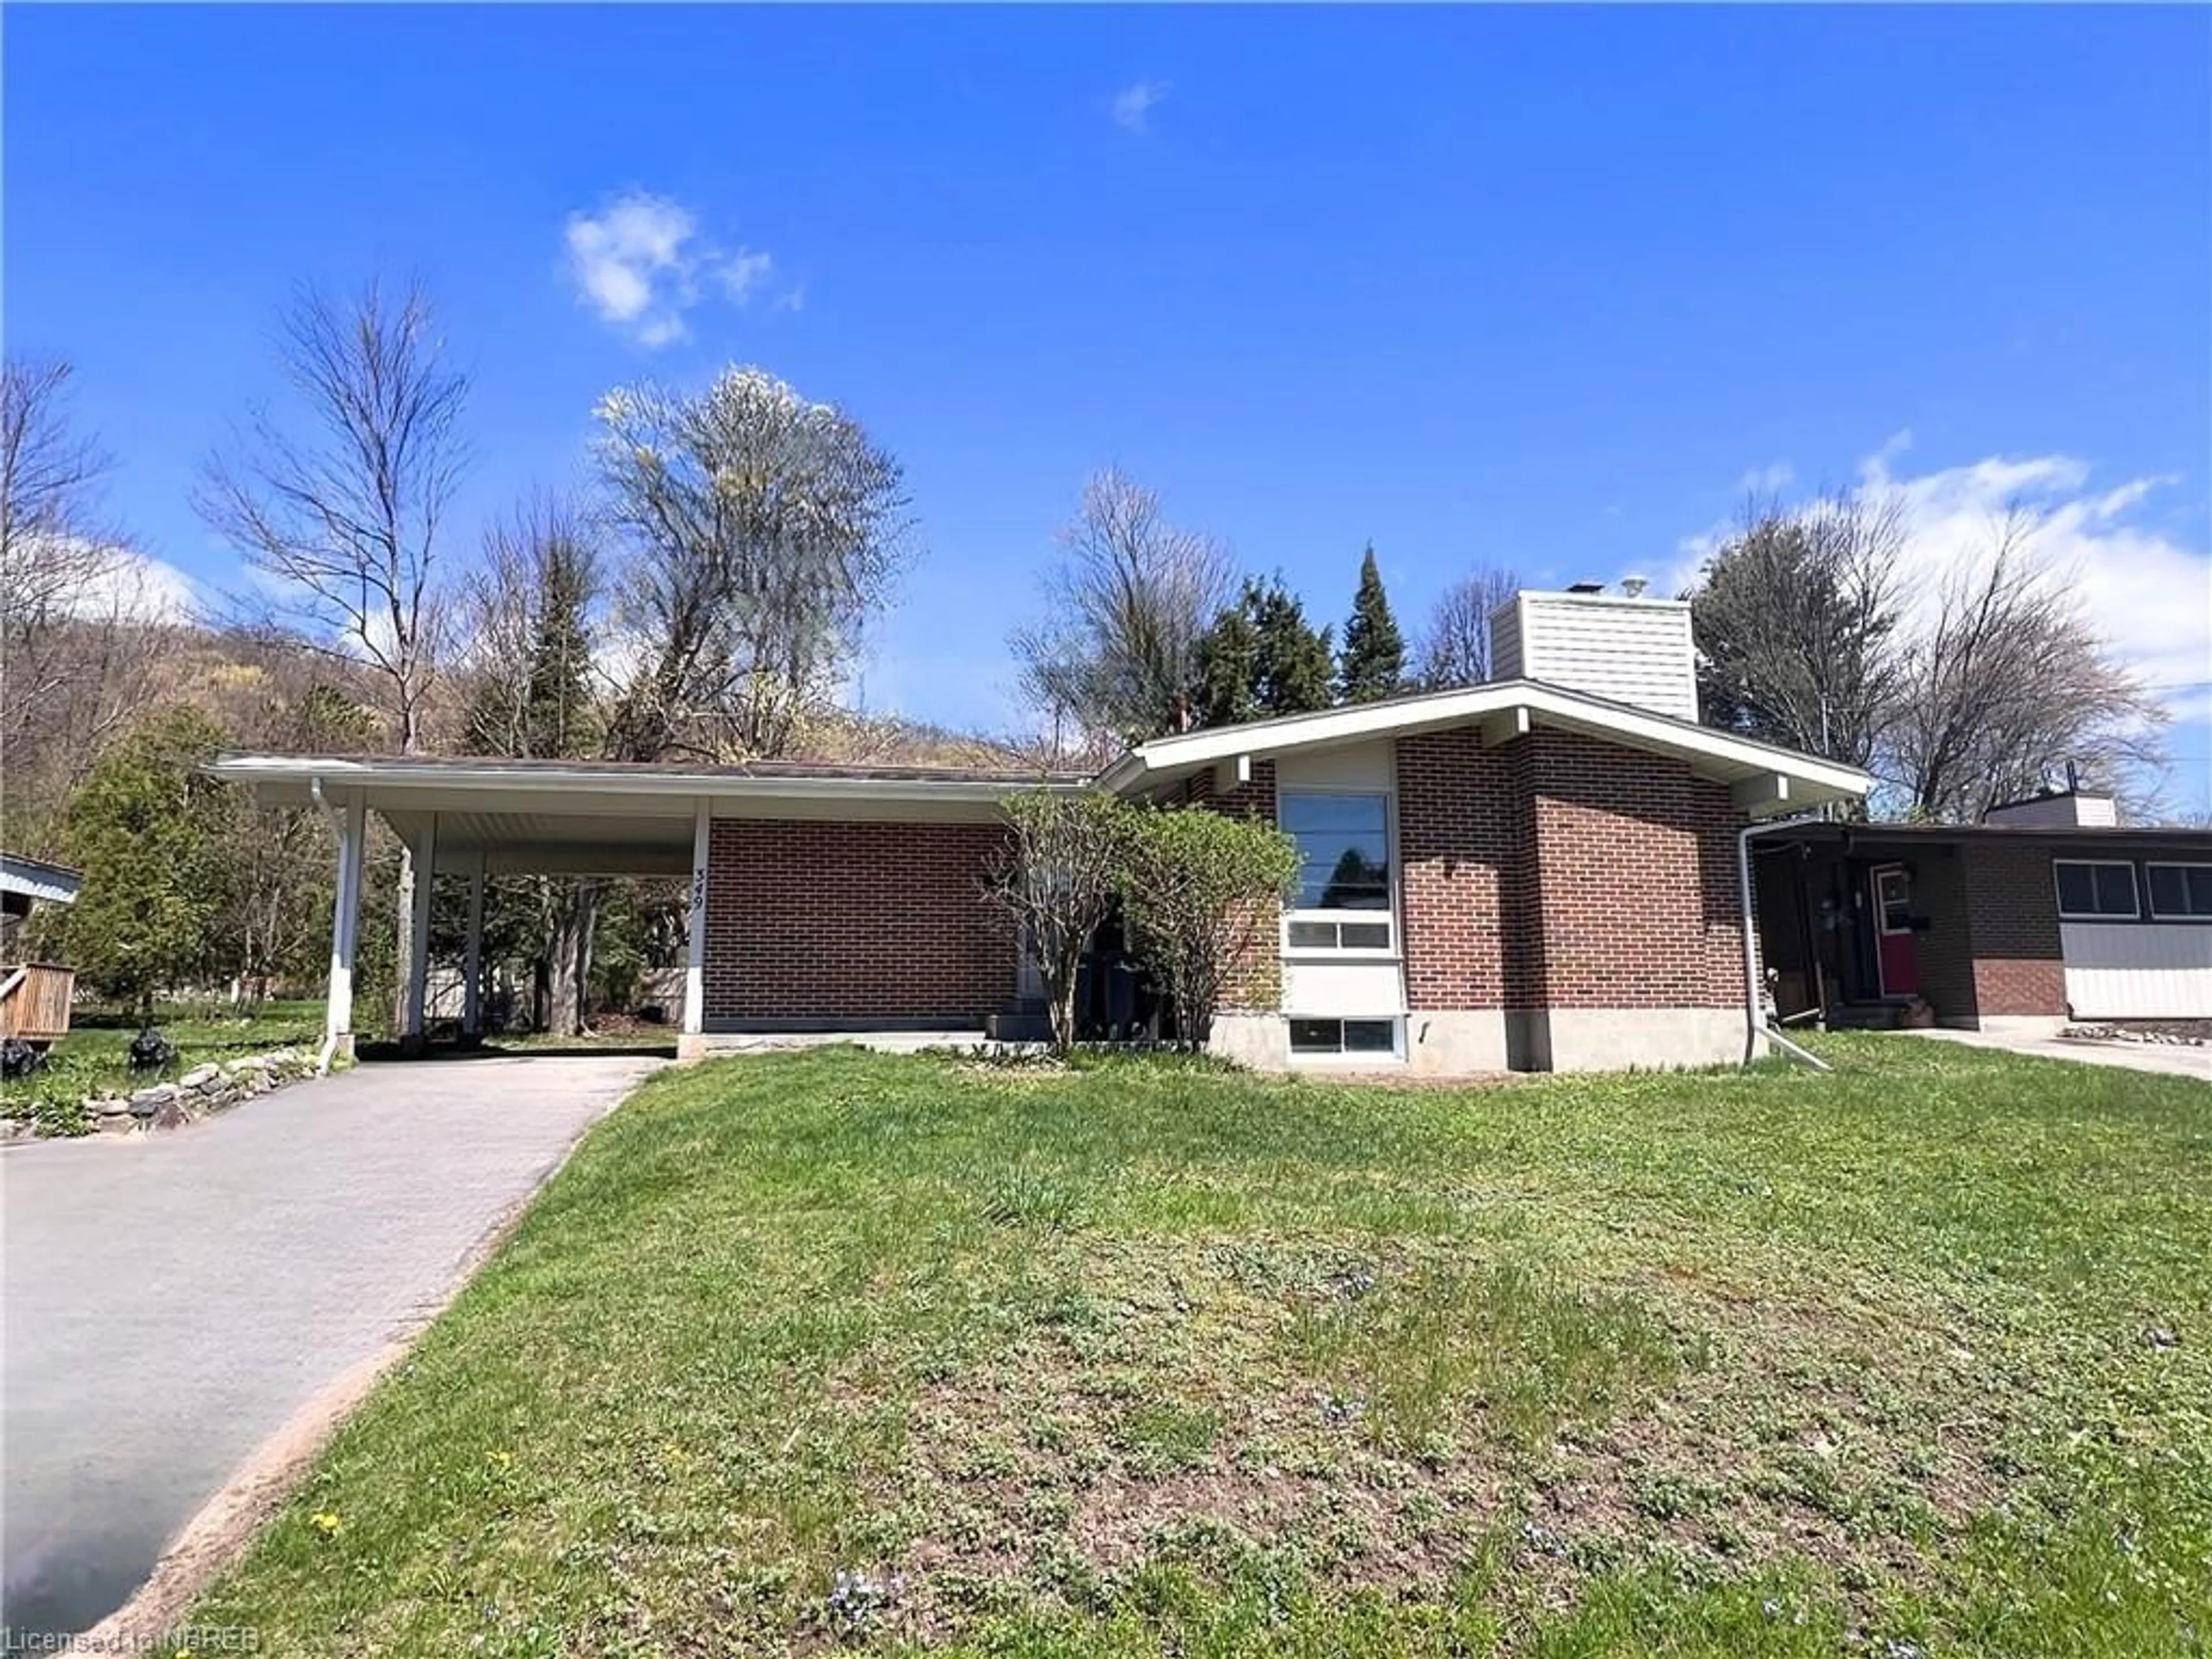 Frontside or backside of a home for 349 Justin St, North Bay Ontario P1B 5K1